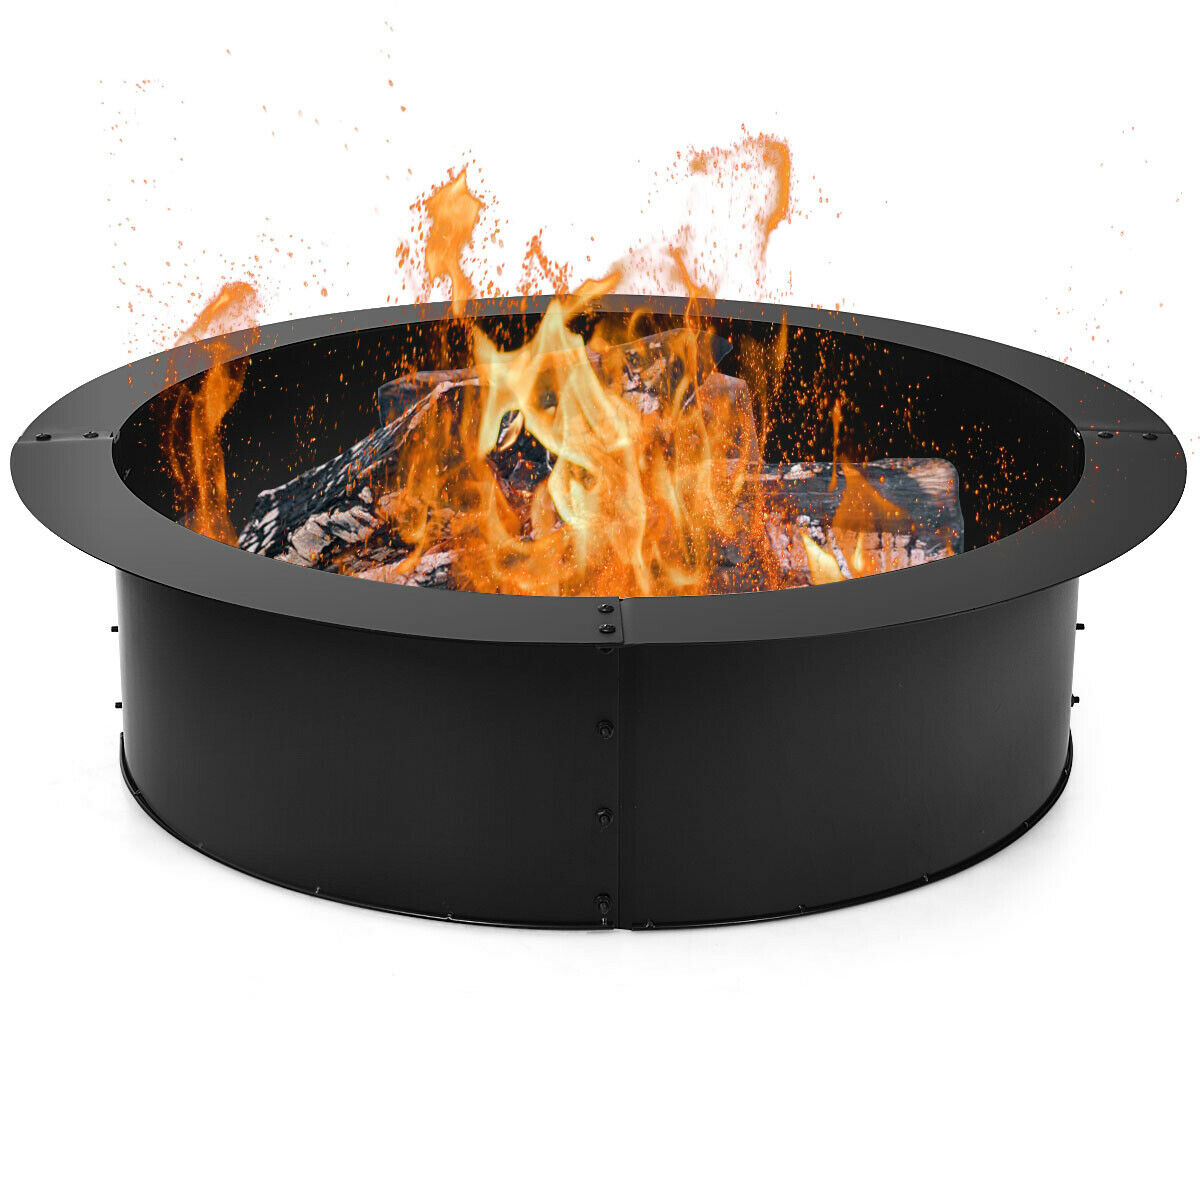 Gymax 36 Inch Round Steel Fire Pit Ring Liner DIY Wood Burning Insert - image 1 of 10